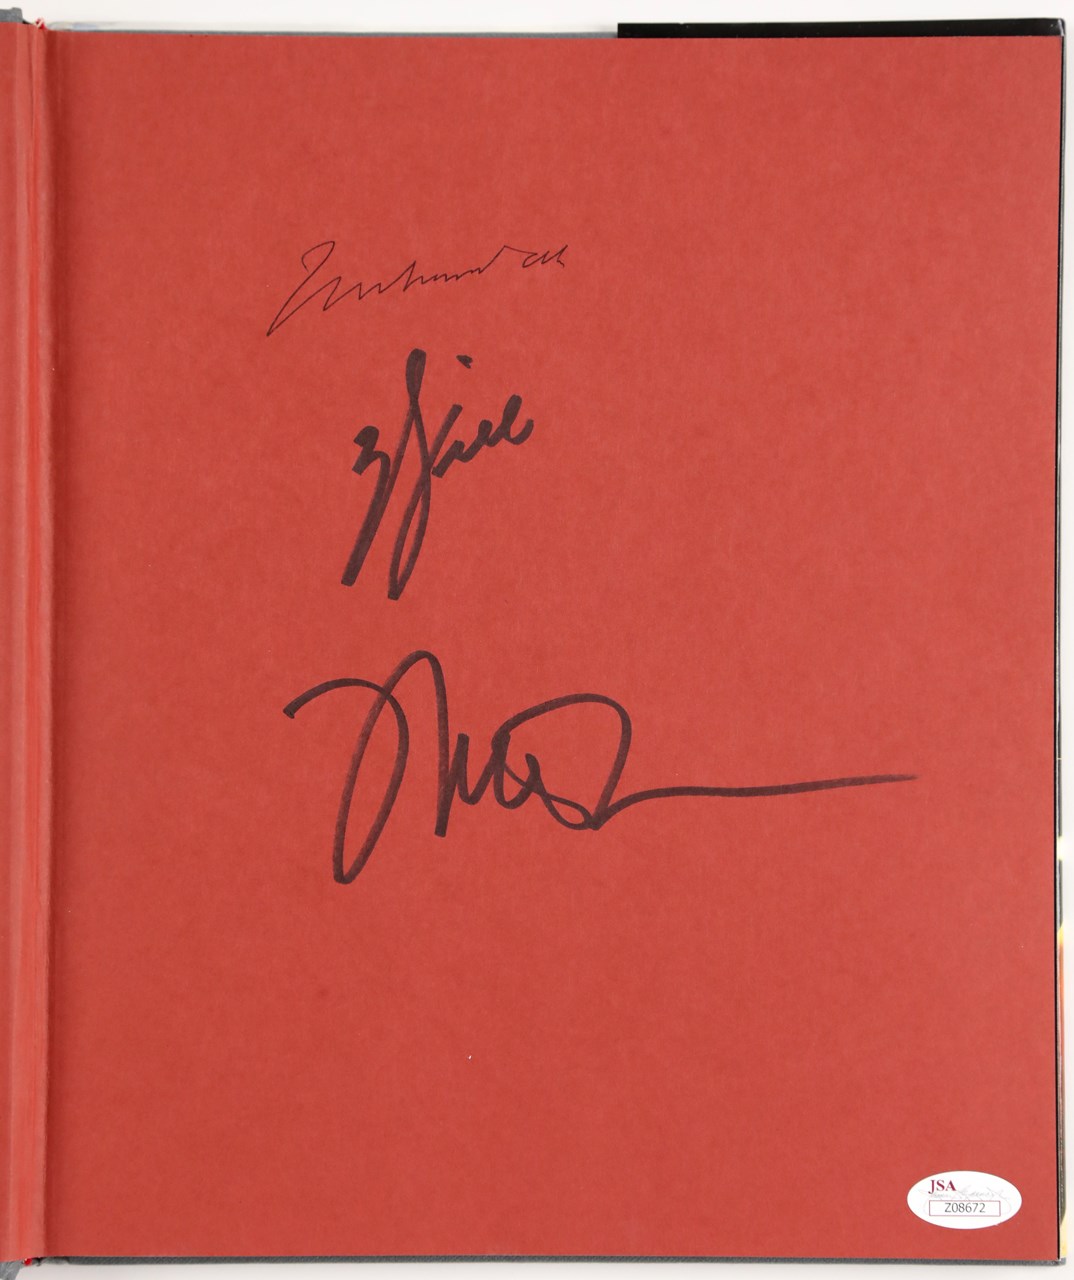 Special "Ali" Book Signed by Muhammad Ali, Will Smith, & Director Michael Mann - Gifted to Hollywood Press Member for Golden Globe Nomination (JSA)